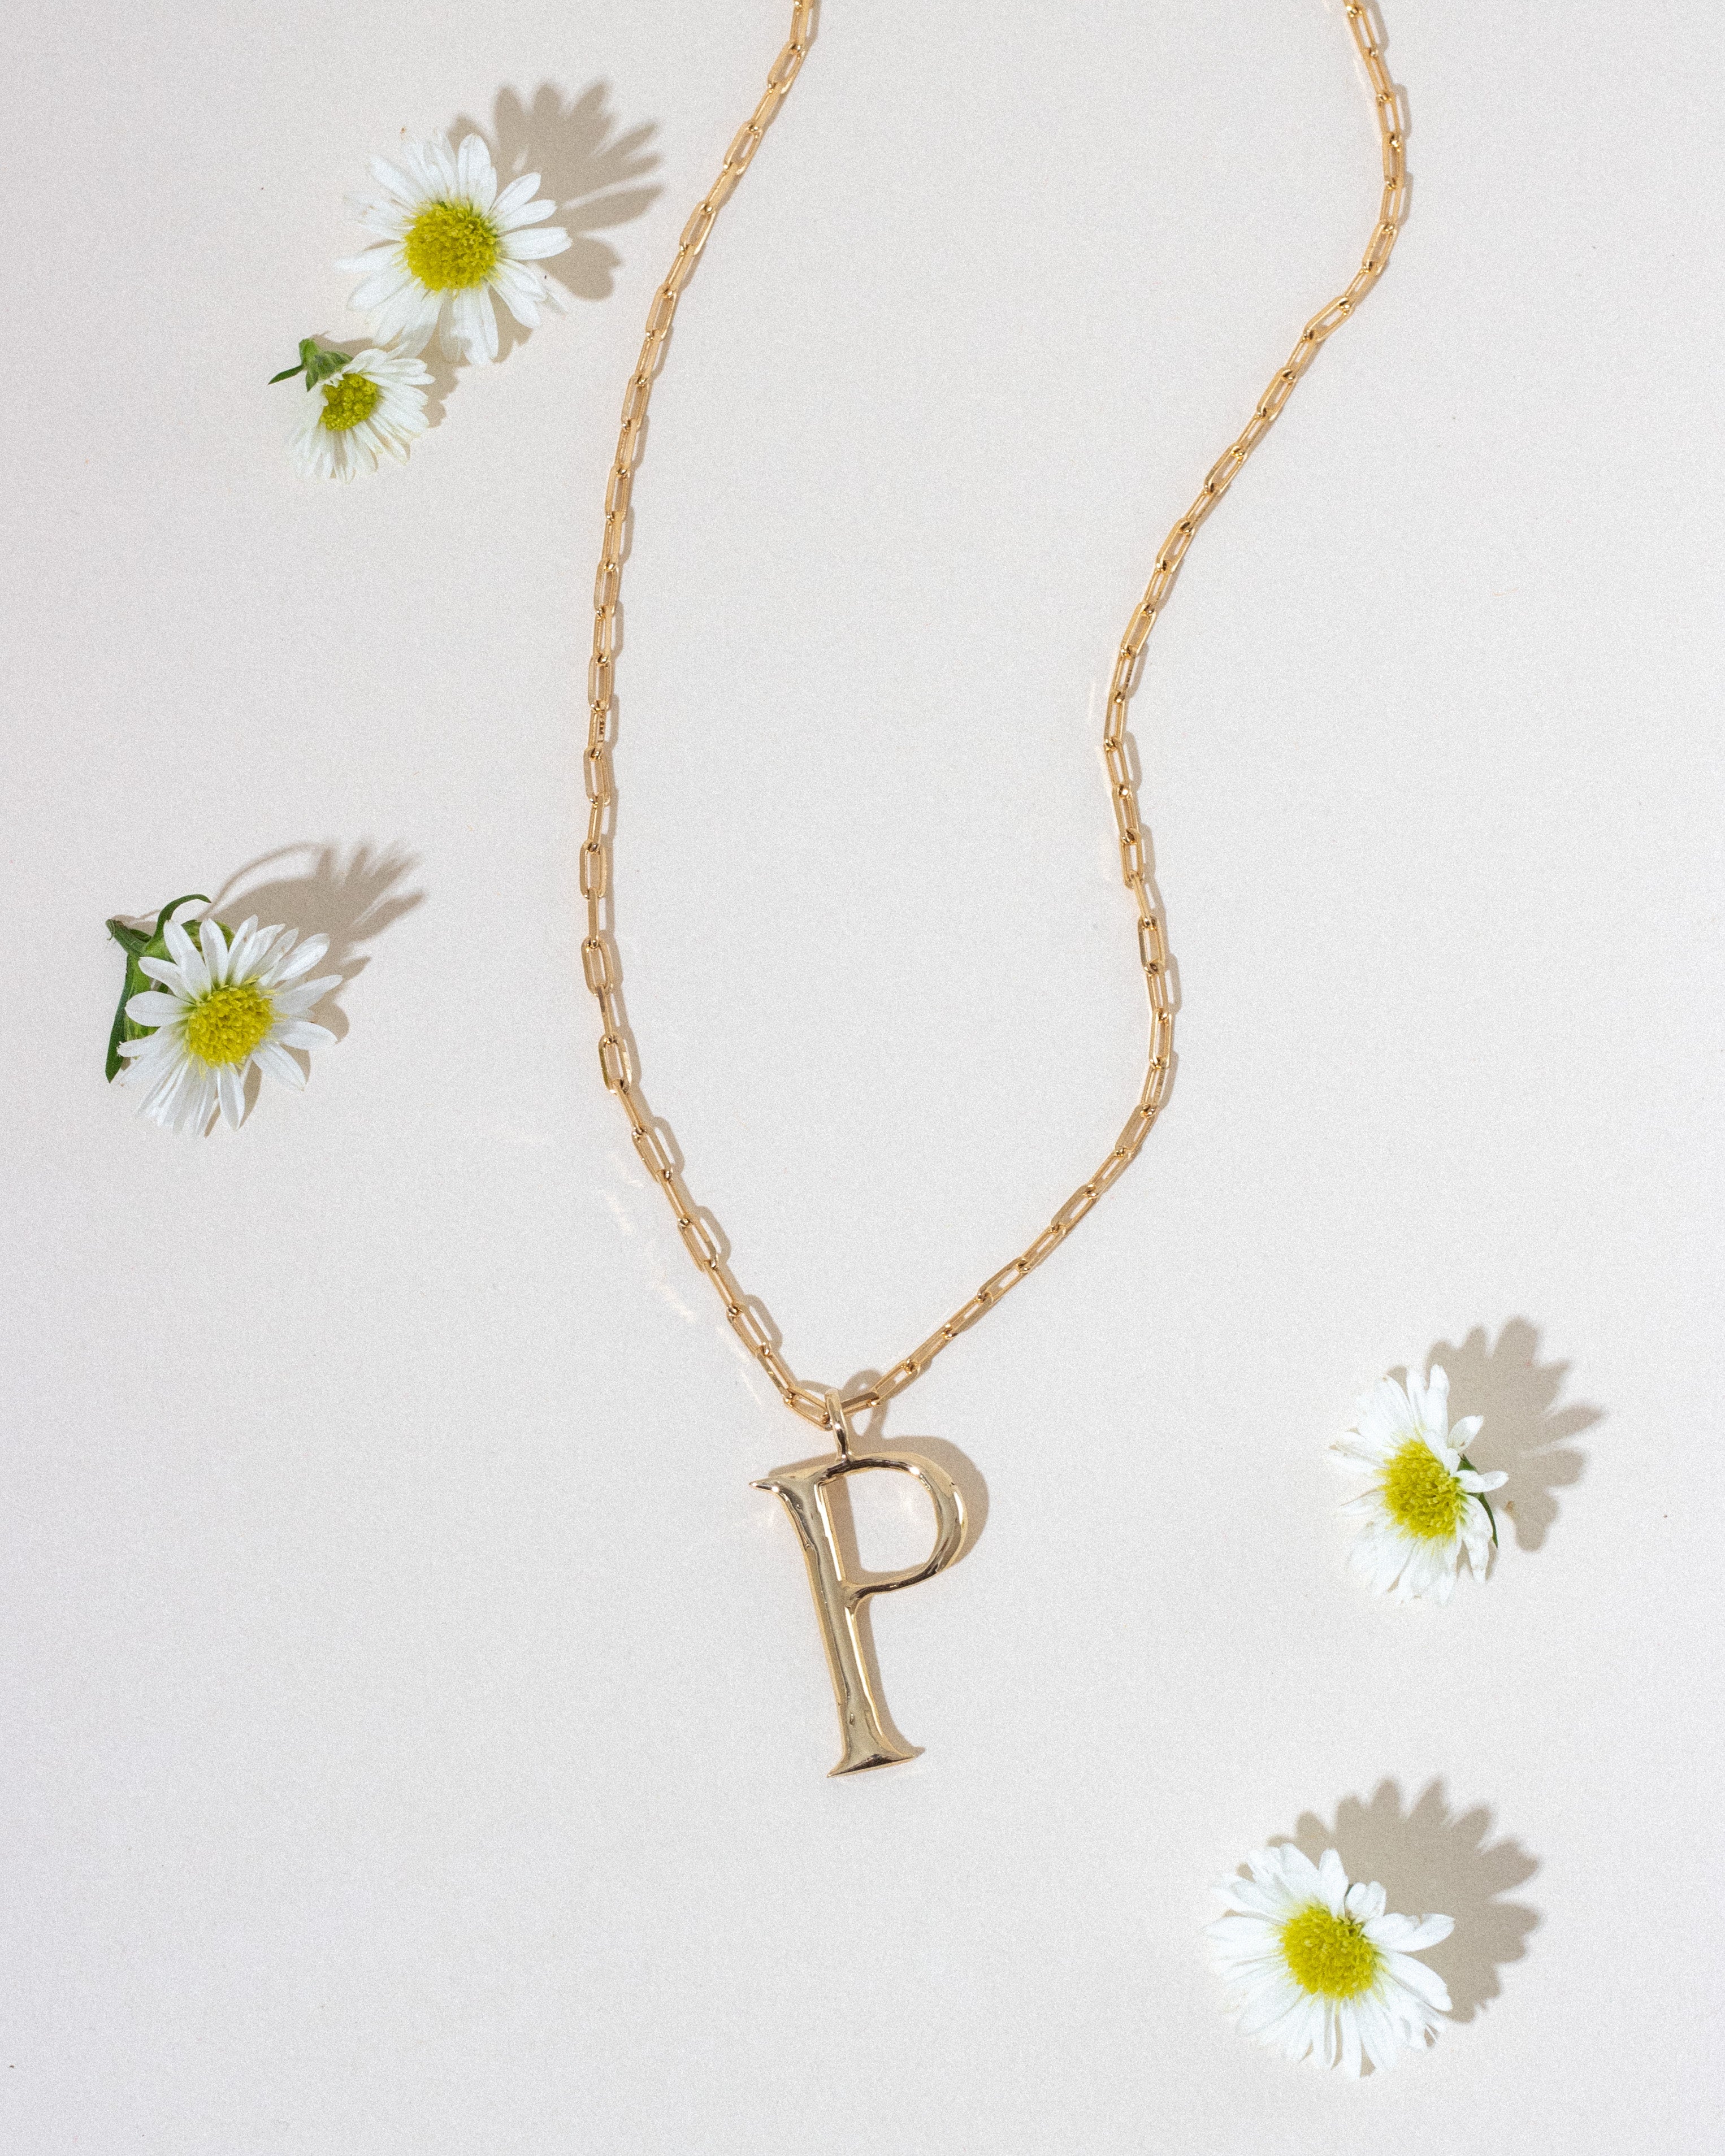 The Serif Initial Necklace